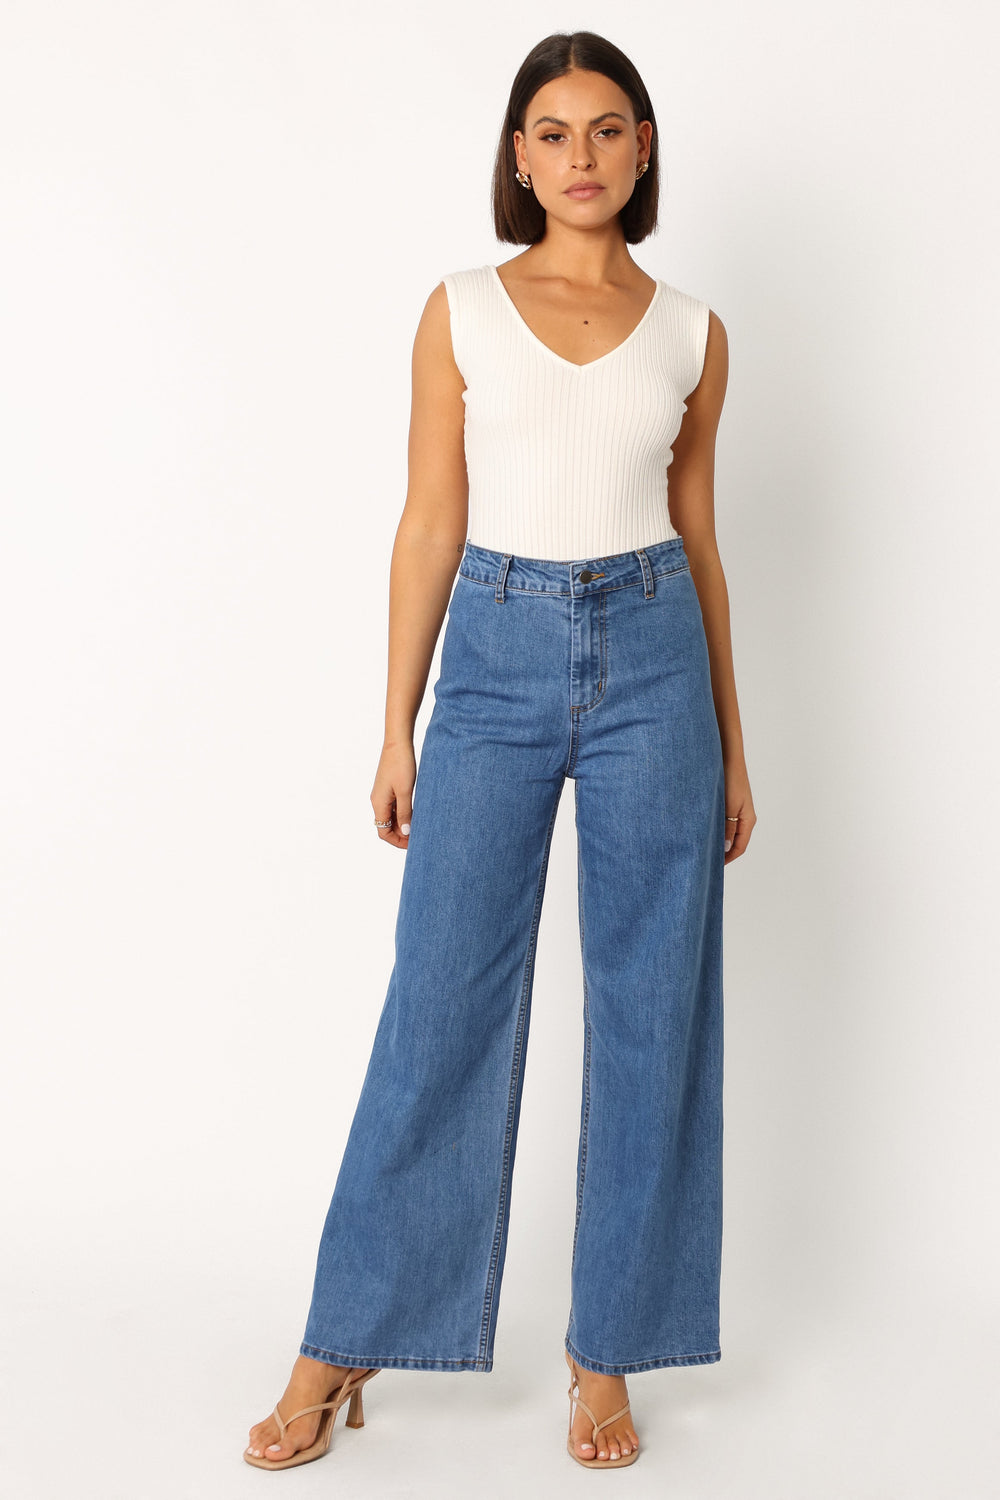 Petal and Pup USA BOTTOMS Barty Wide Leg Jean - Blue